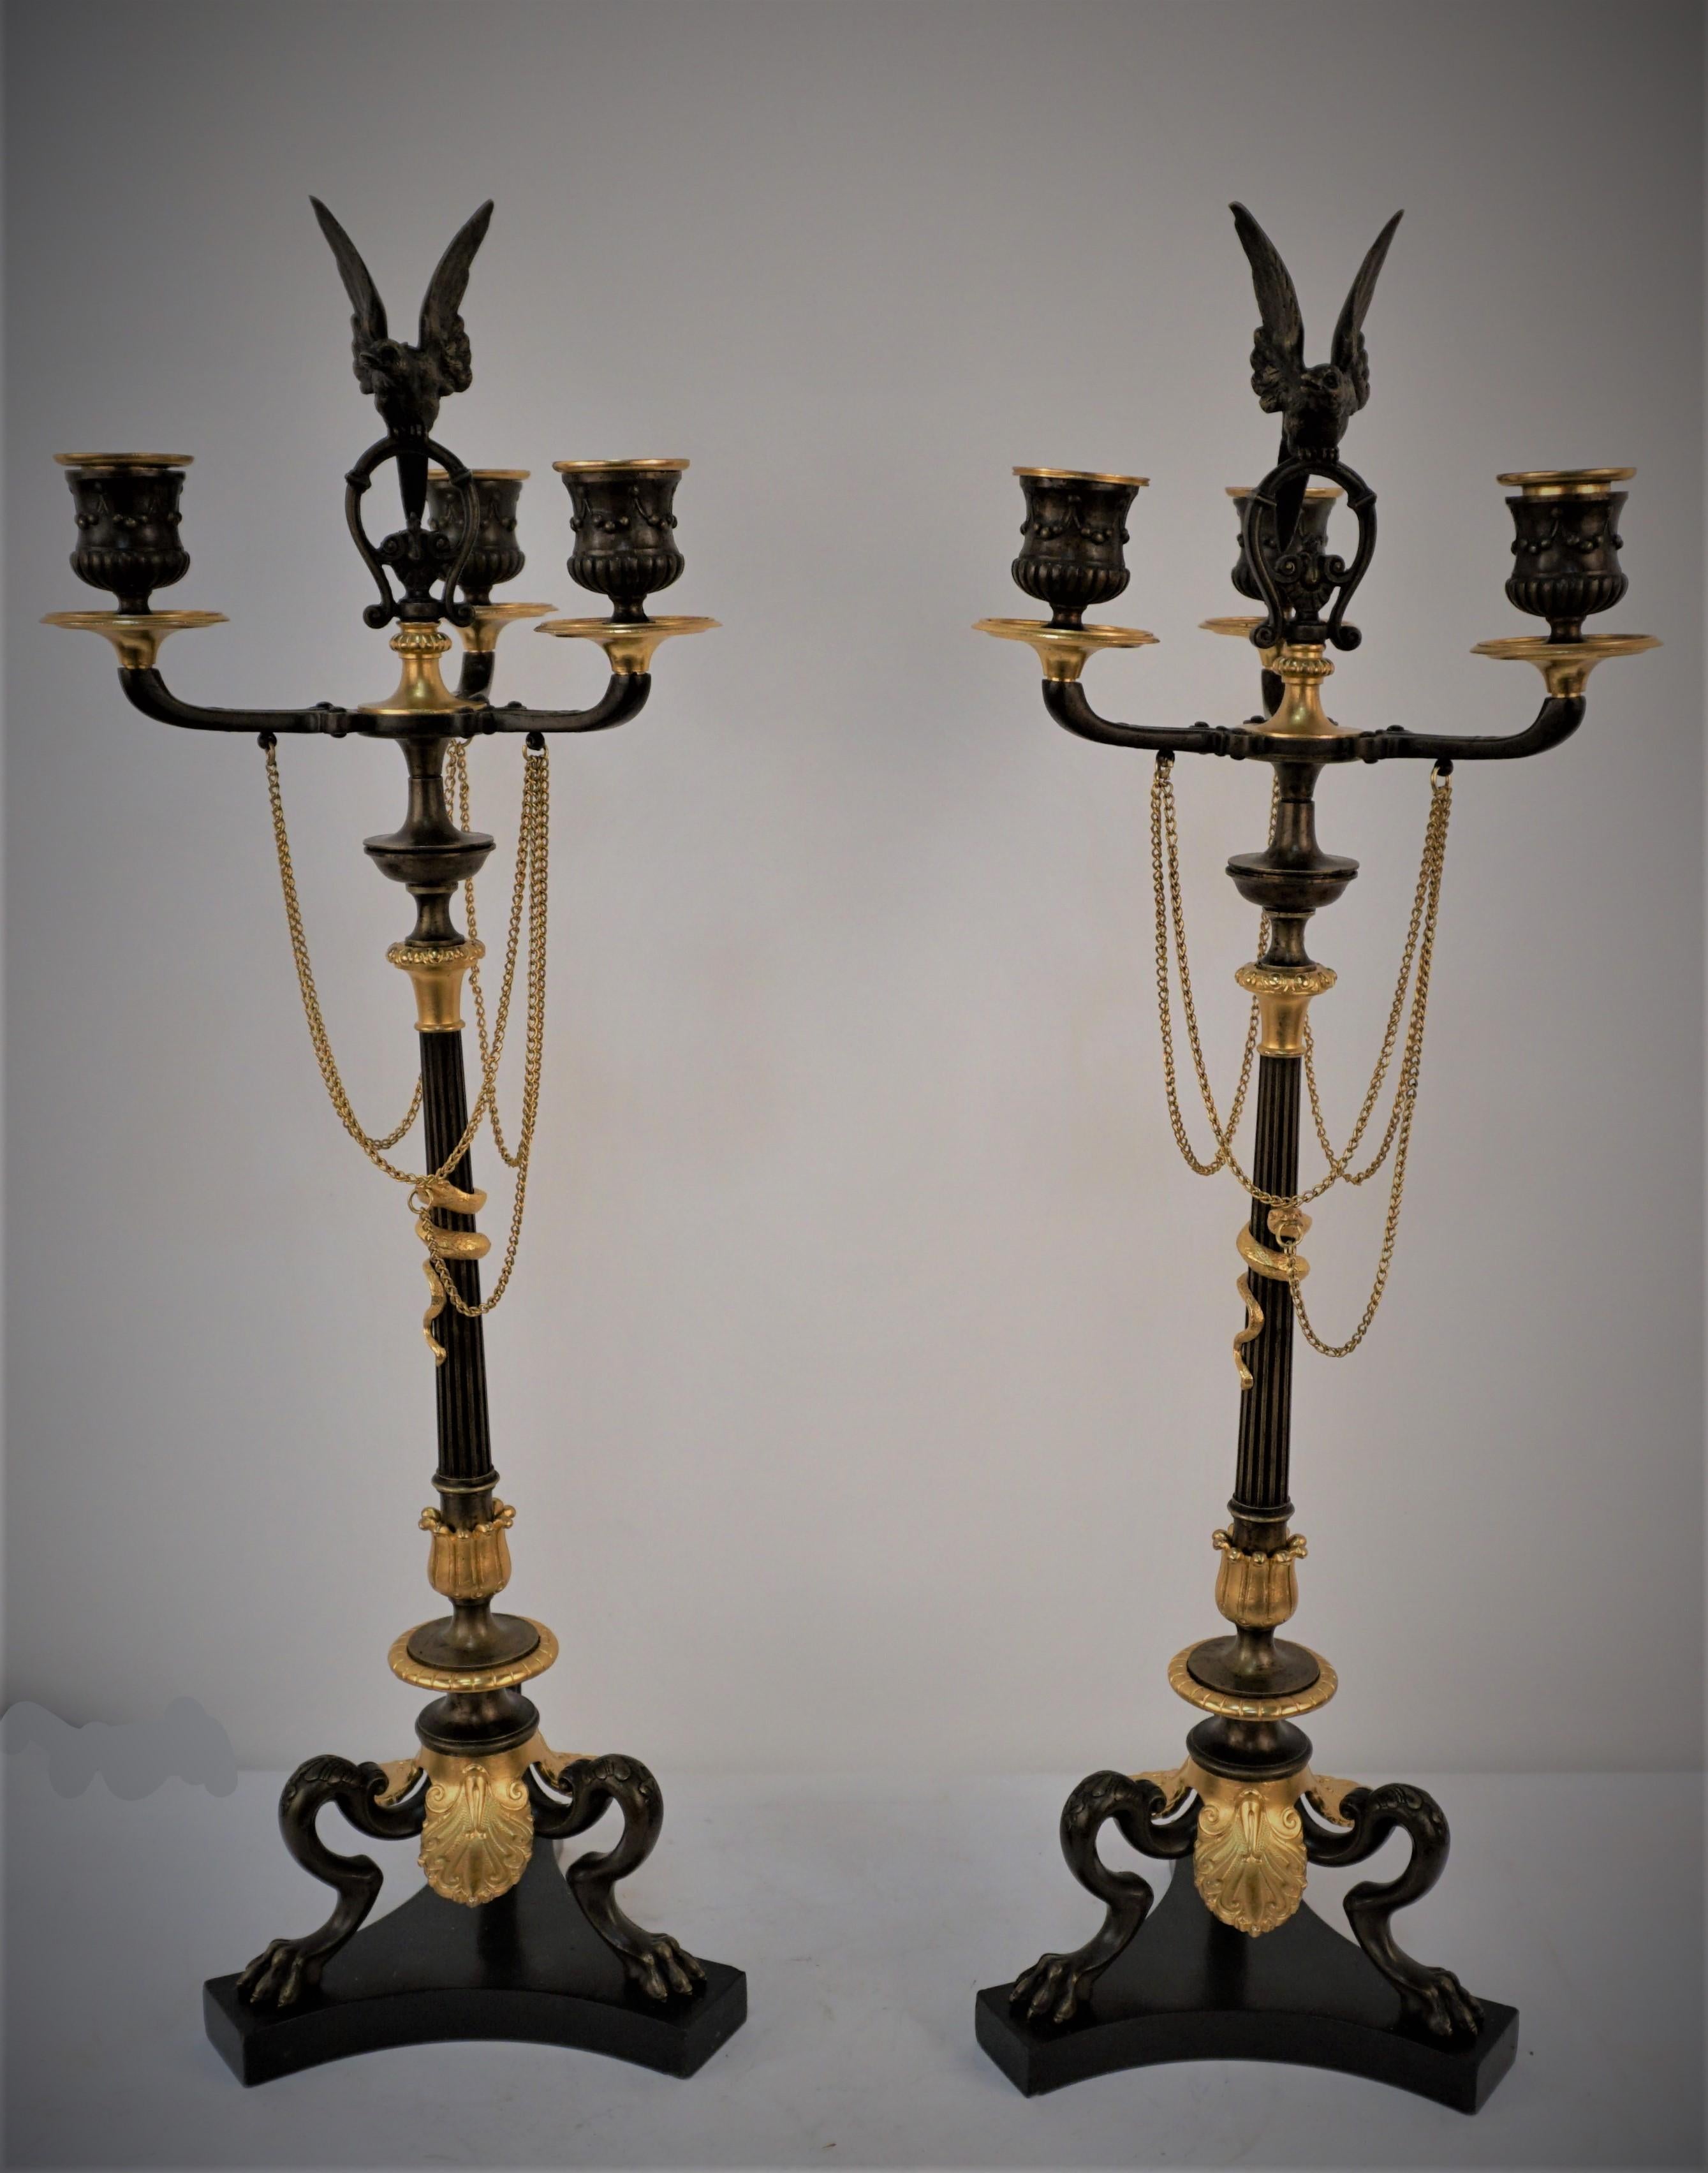 Pair of 19th Century Gilt and Oxidized Bronze Candelabra For Sale 9